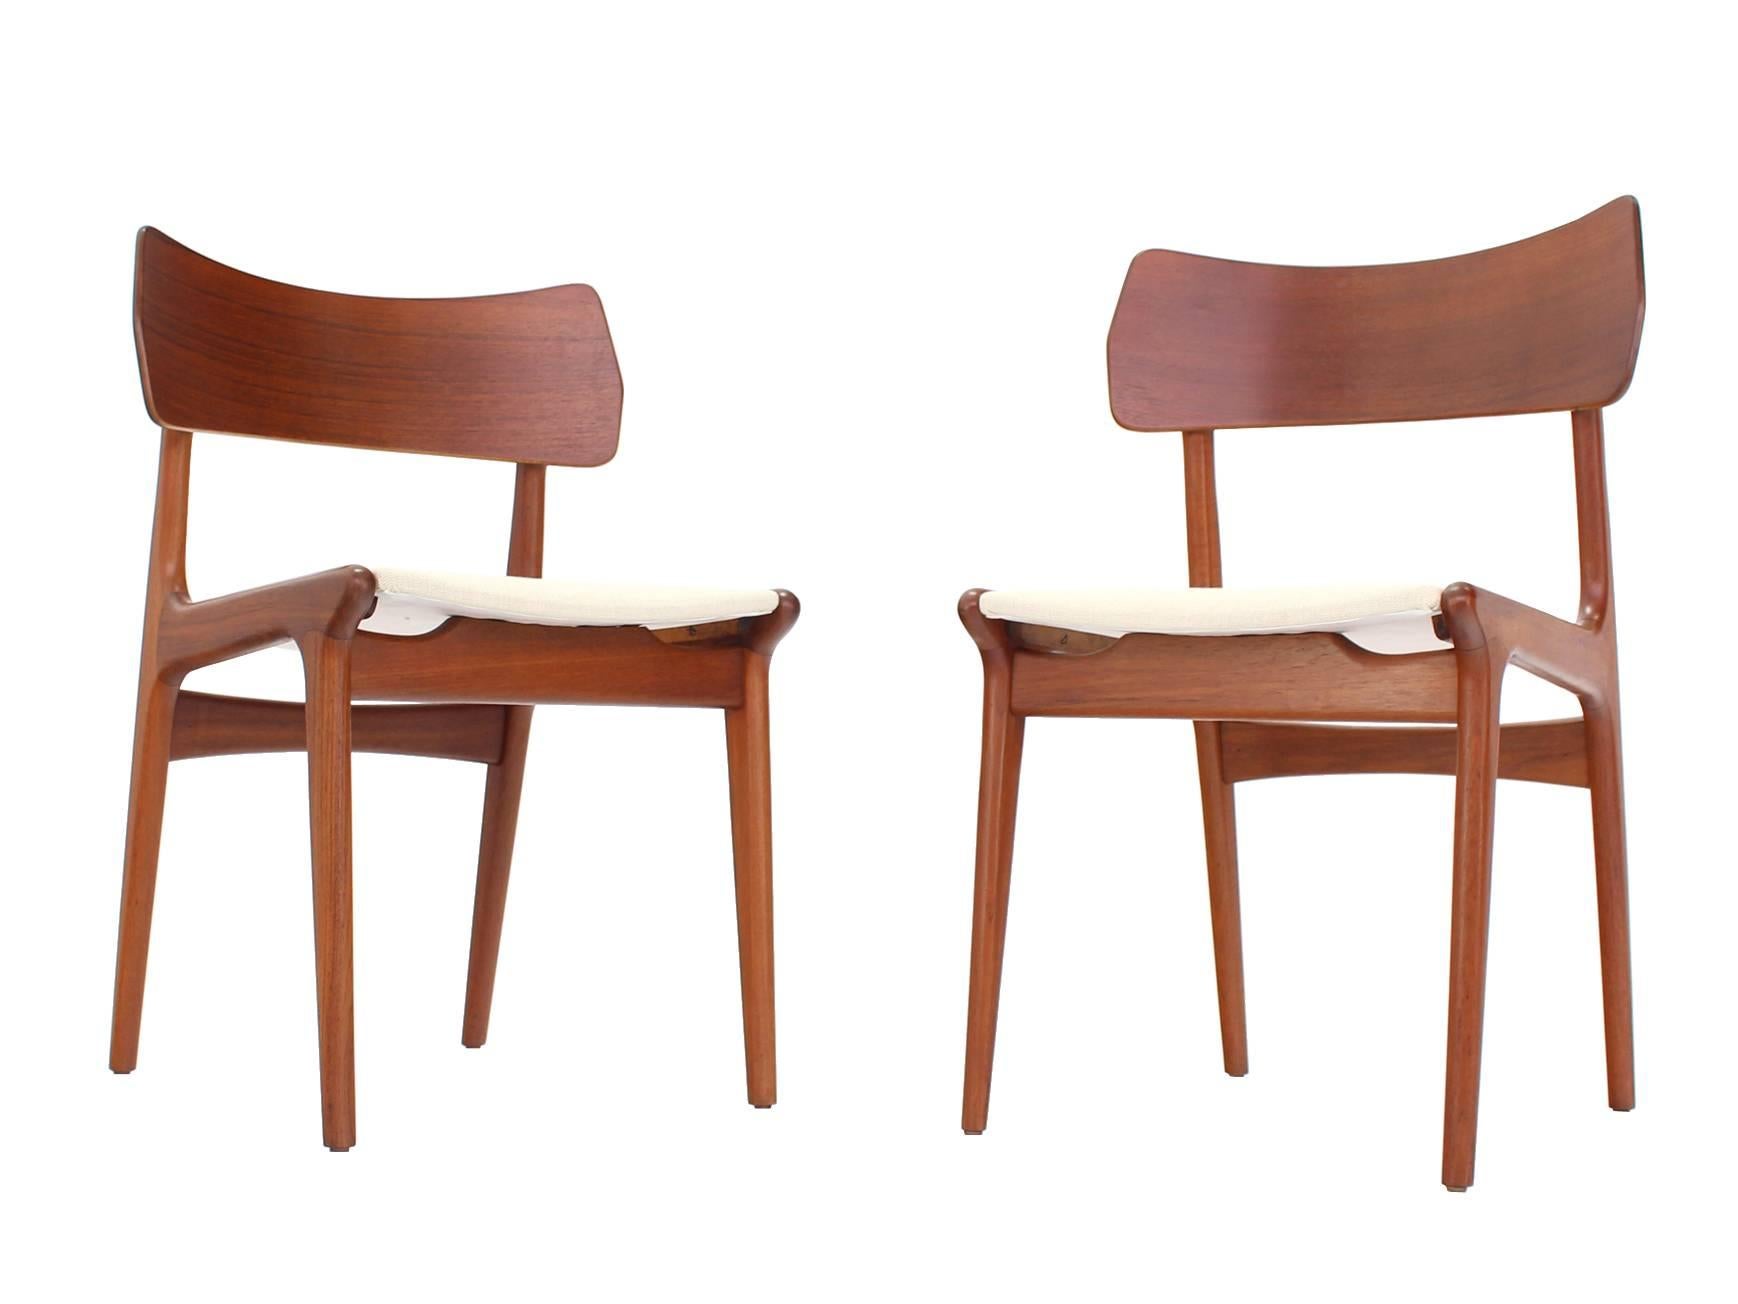 Set of four Danish modern wide backs side chairs with new upholstery.